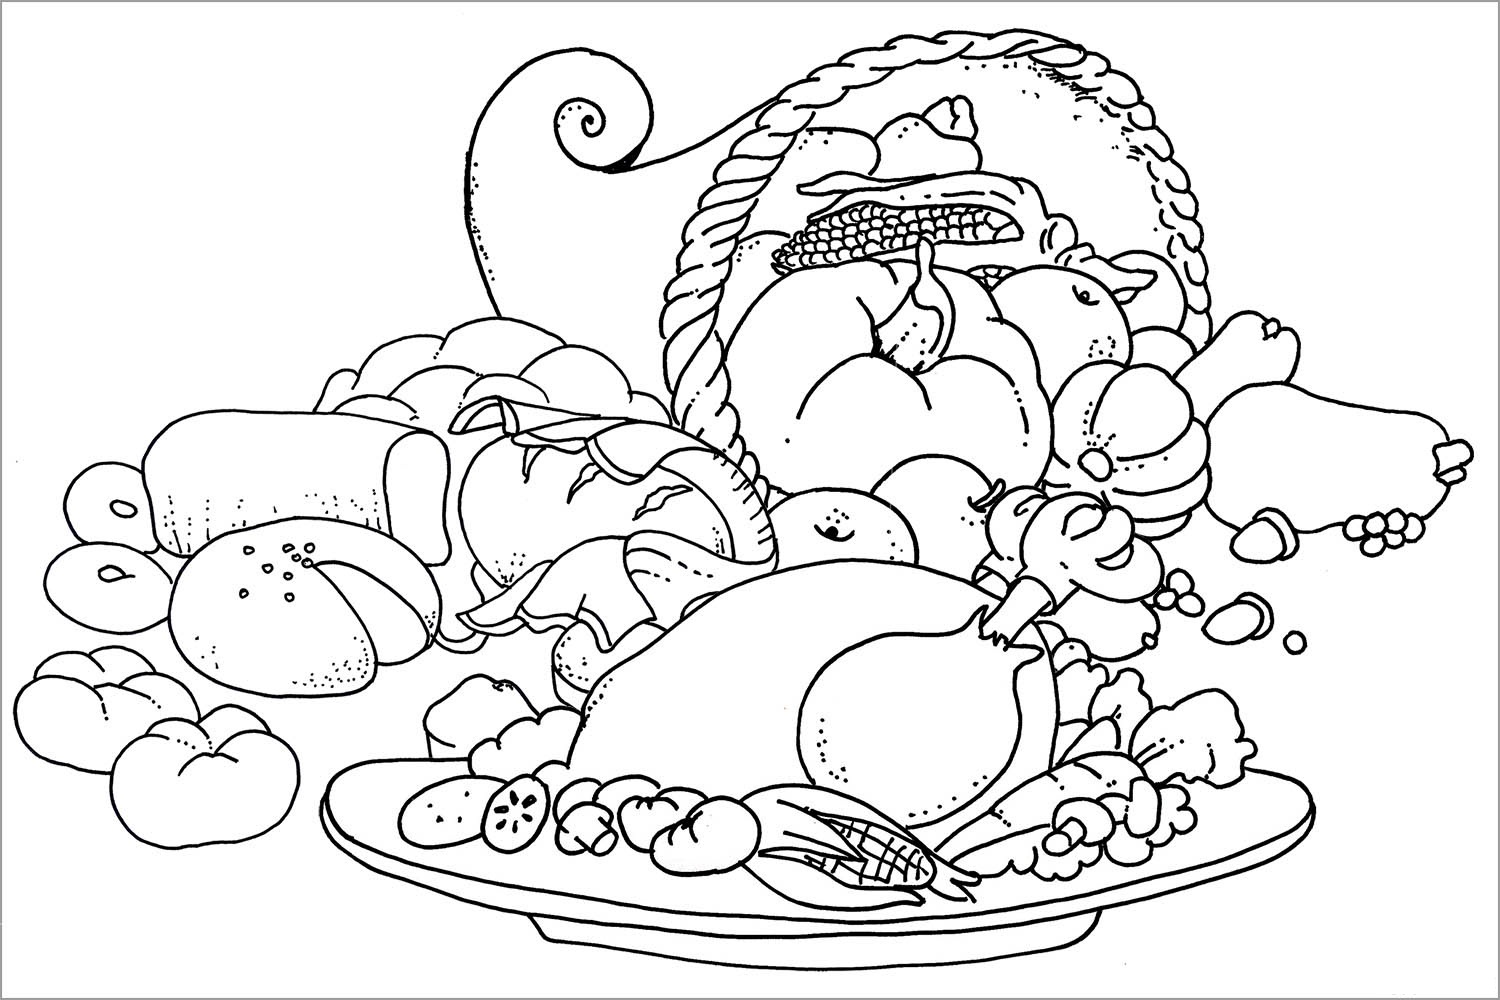 Thanksgiving Food Coloring Pages